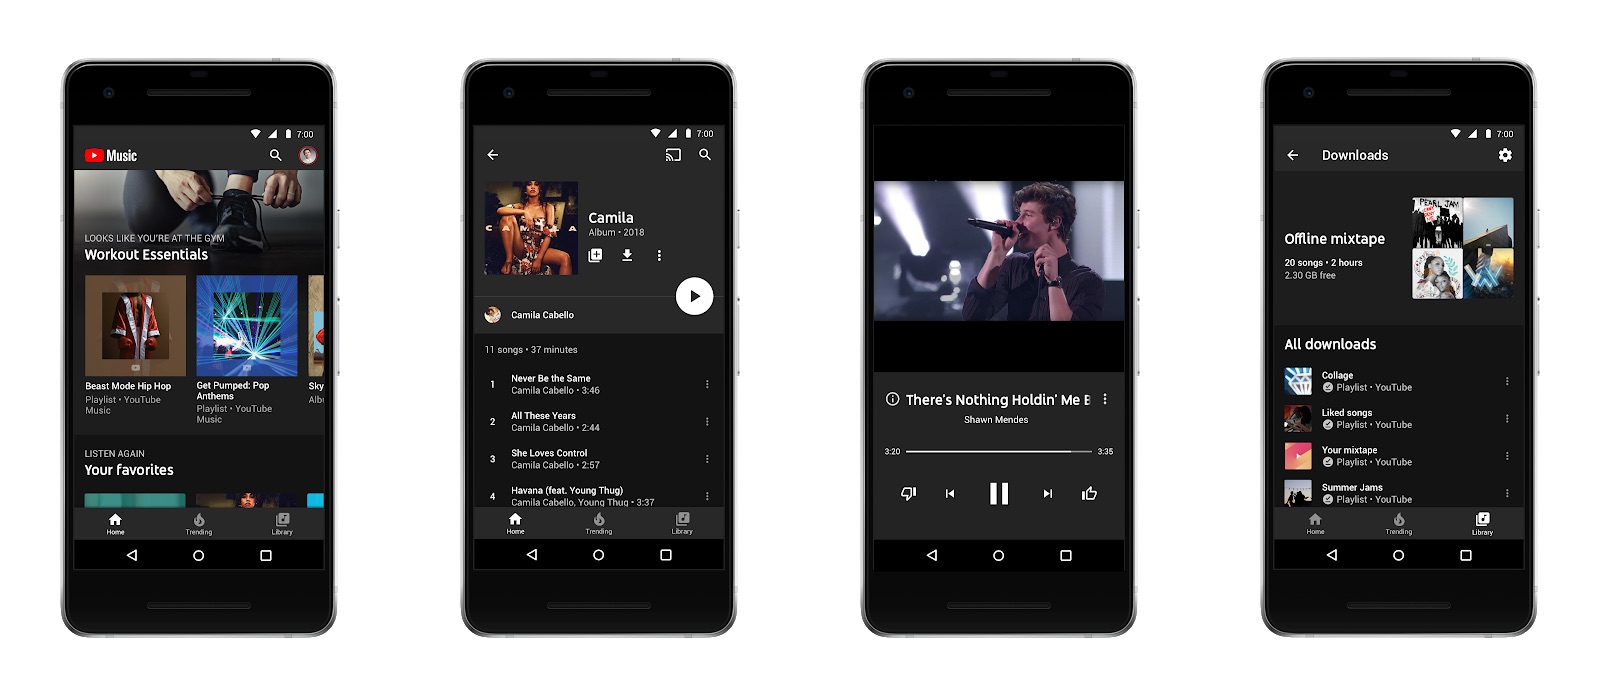 YouTube Music is the new bet of Google, which also announces YouTube Premium with original content